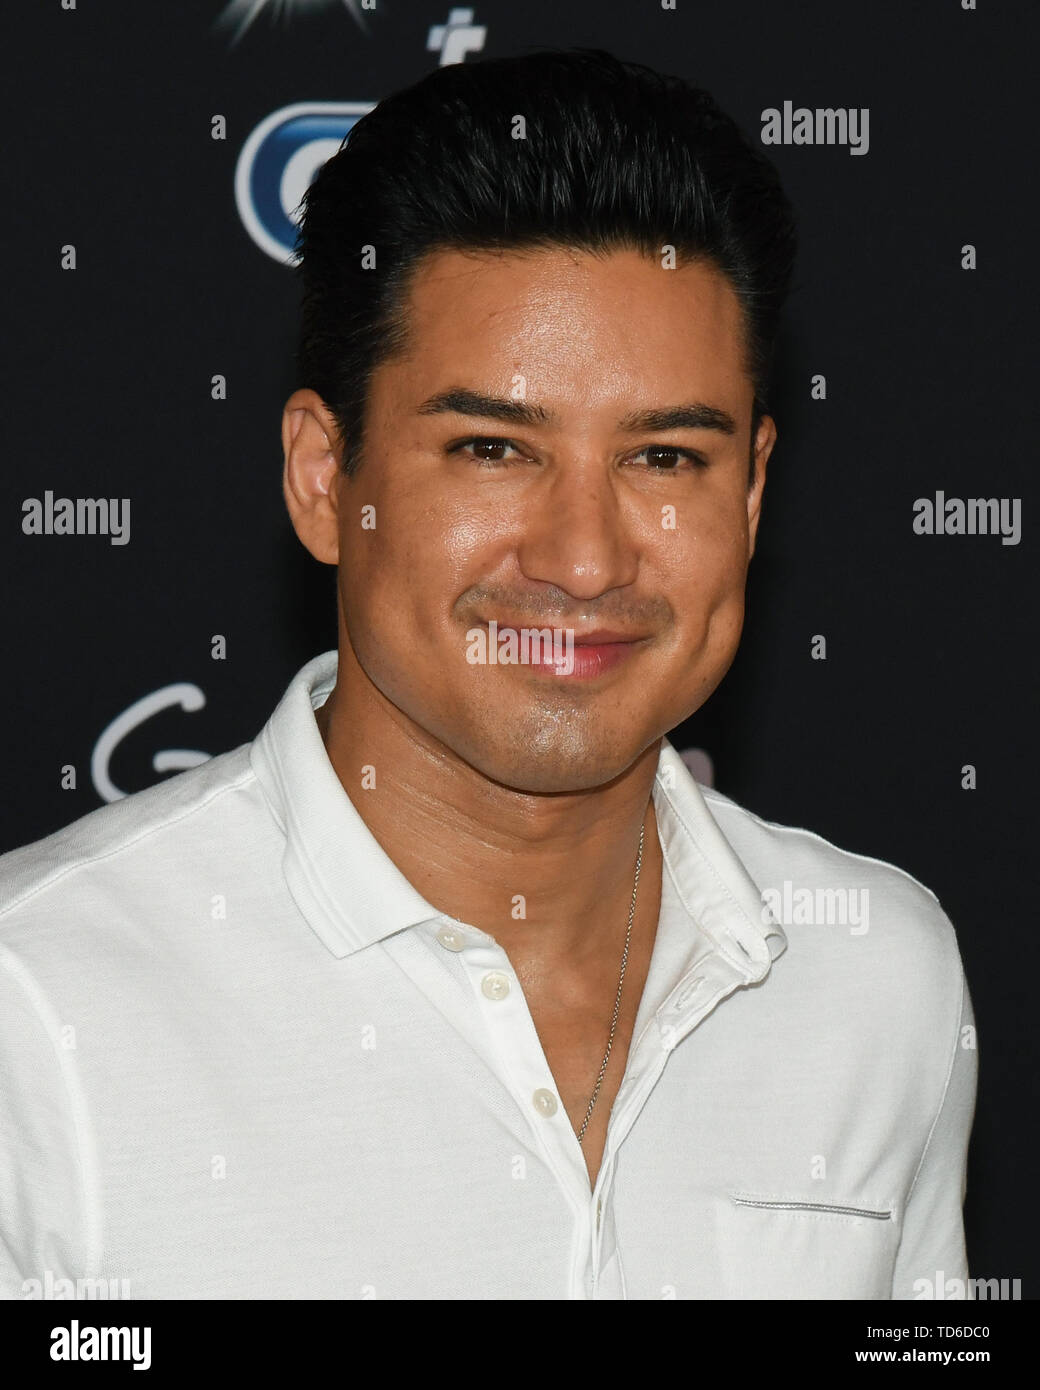 June 11, 2019 - Hollywood, California, USA - 12, June 2019 - Los Angeles, California. Mario Lopez attends the premiere of Disney and Pixar's 'Toy Story 4' at El Capitan Theatre. (Credit Image: © Billy Bennight/ZUMA Wire) Stock Photo